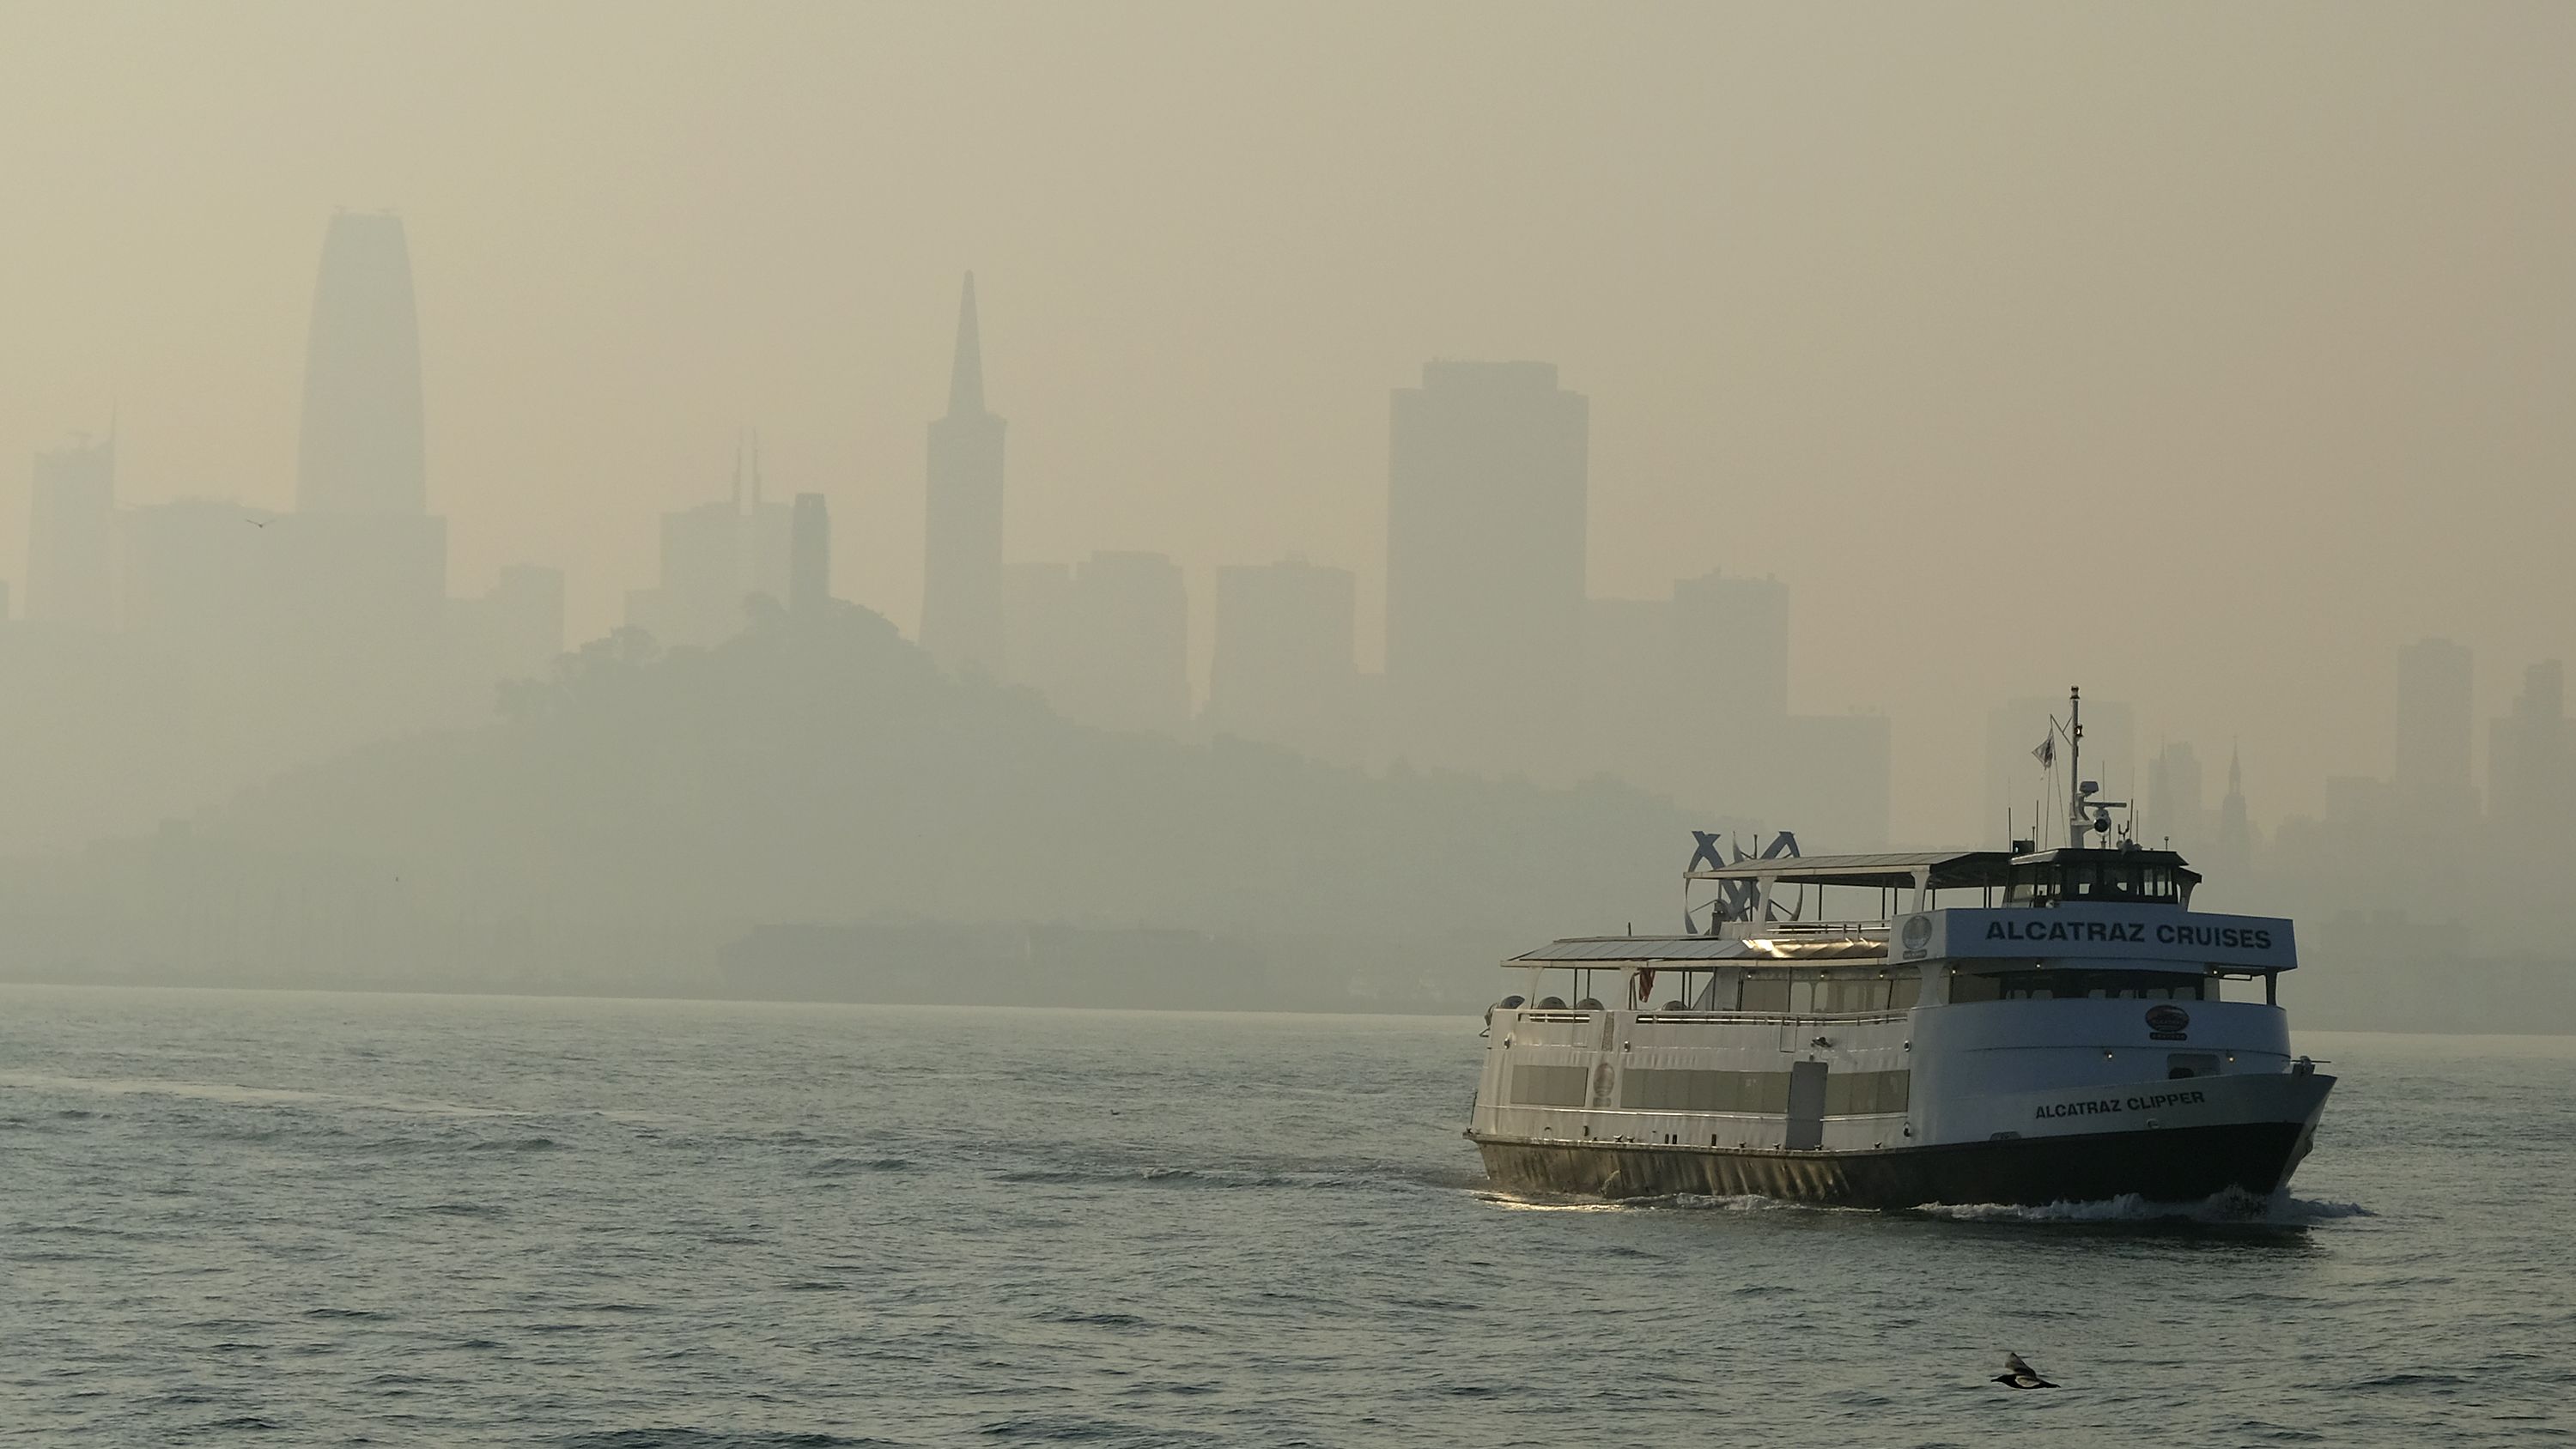 A ferry boat makes its way toward Alcatraz Island as the San Francisco skyline in is obscured by wildfire smoke and haze.